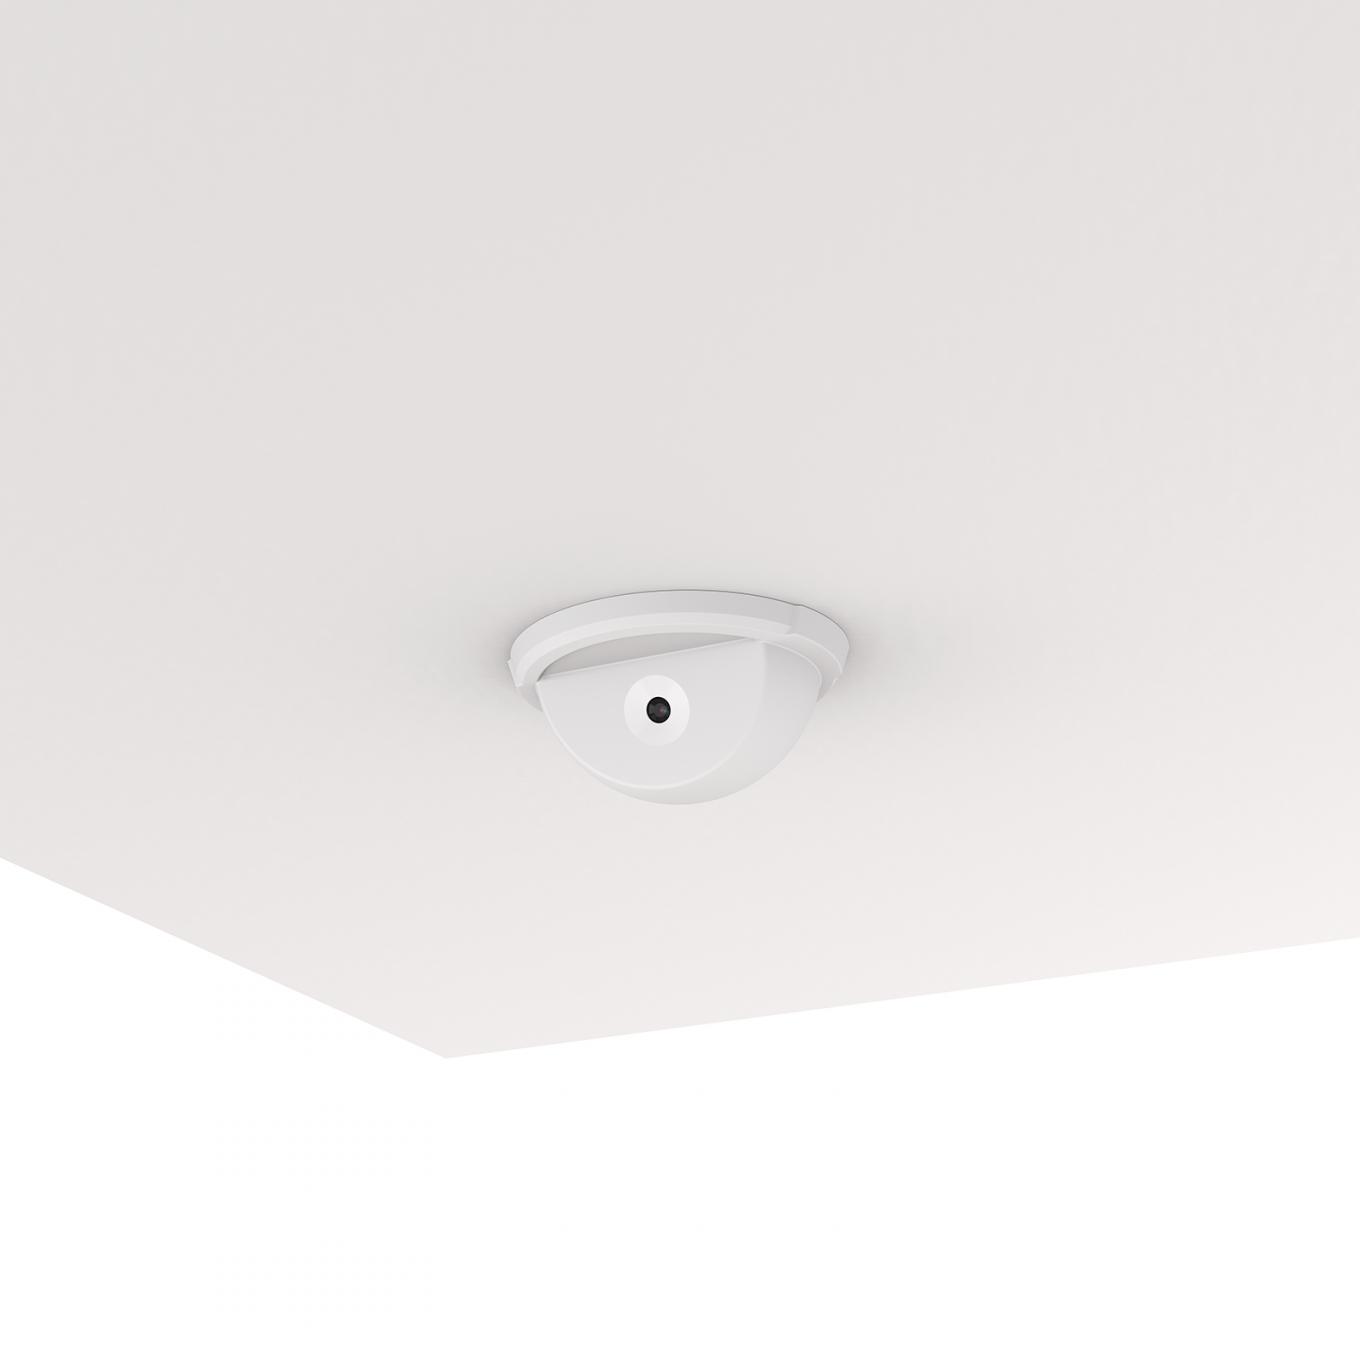 AXIS F8225 Pinhole Accessory mounted in the ceiling, from the left angle